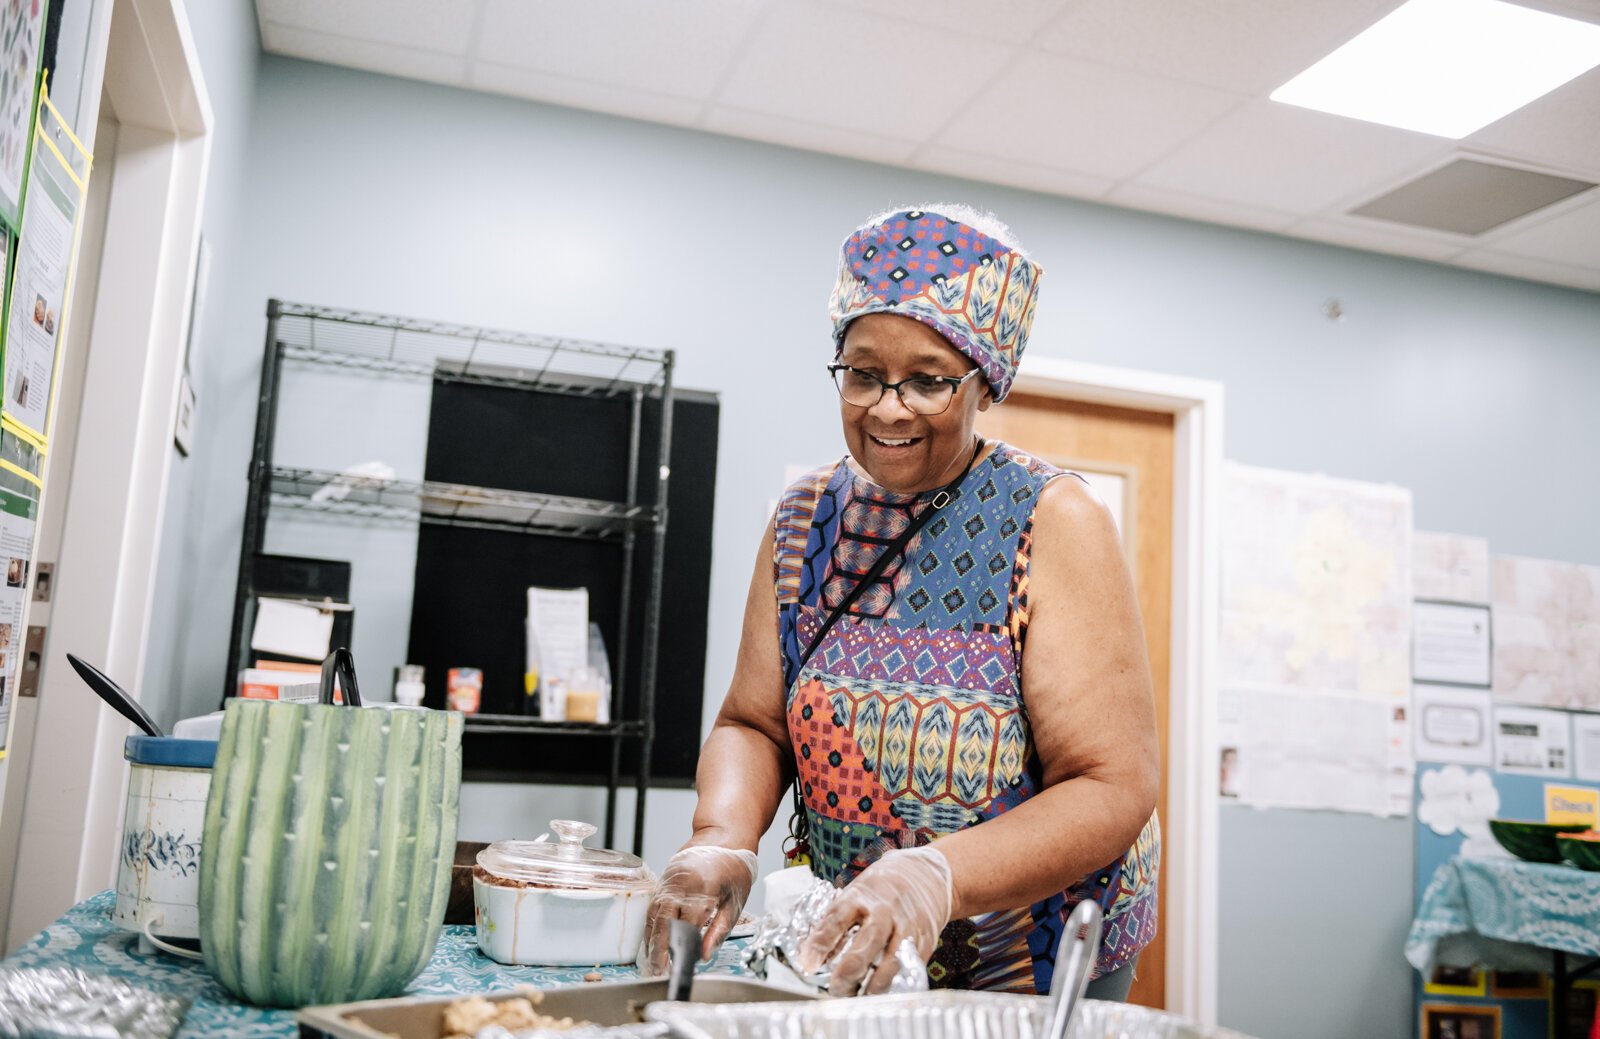 Community Leader Denise Porter works on organizing the food during "Super Saturday" a free monthly community meal for the housing members at River's Edge. River's Edge is a supportive housing complex on Spy Run Ave. Ext.